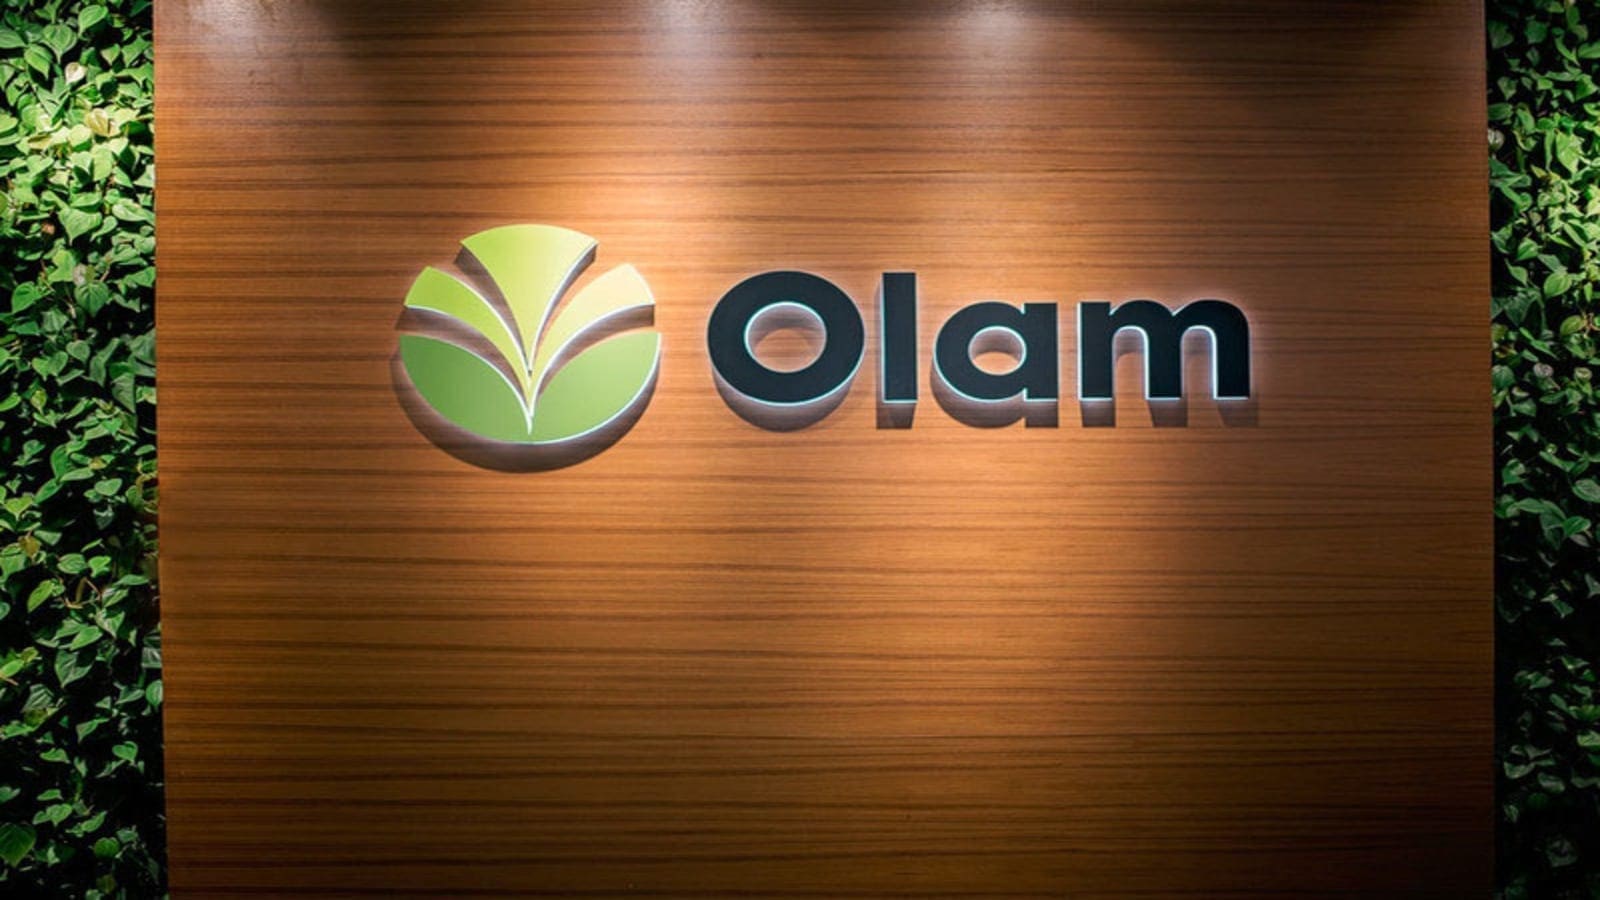 Olam to list food ingredients unit in London after first half profit jump